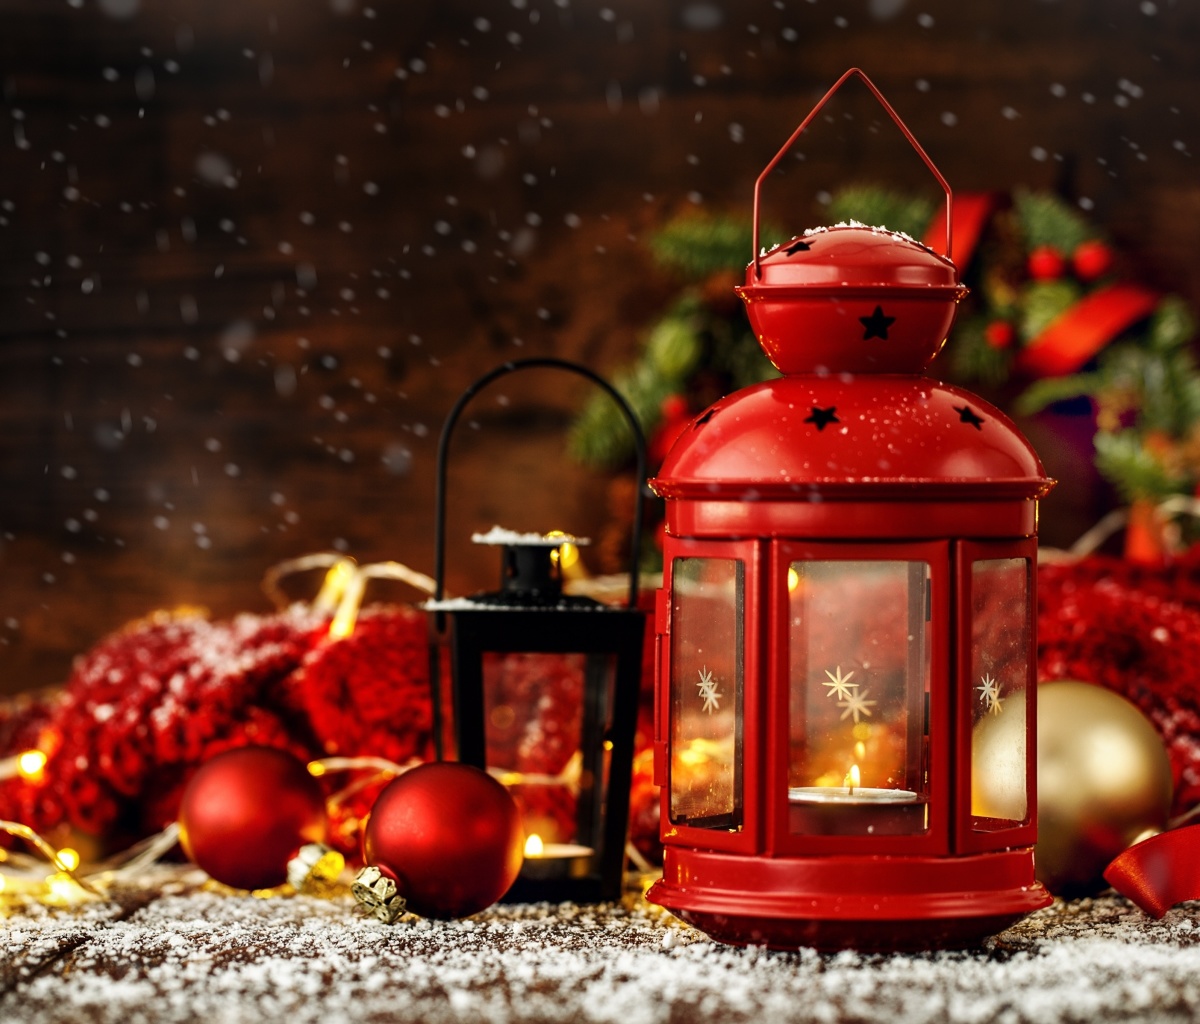 Das Christmas candles with holiday decor Wallpaper 1200x1024